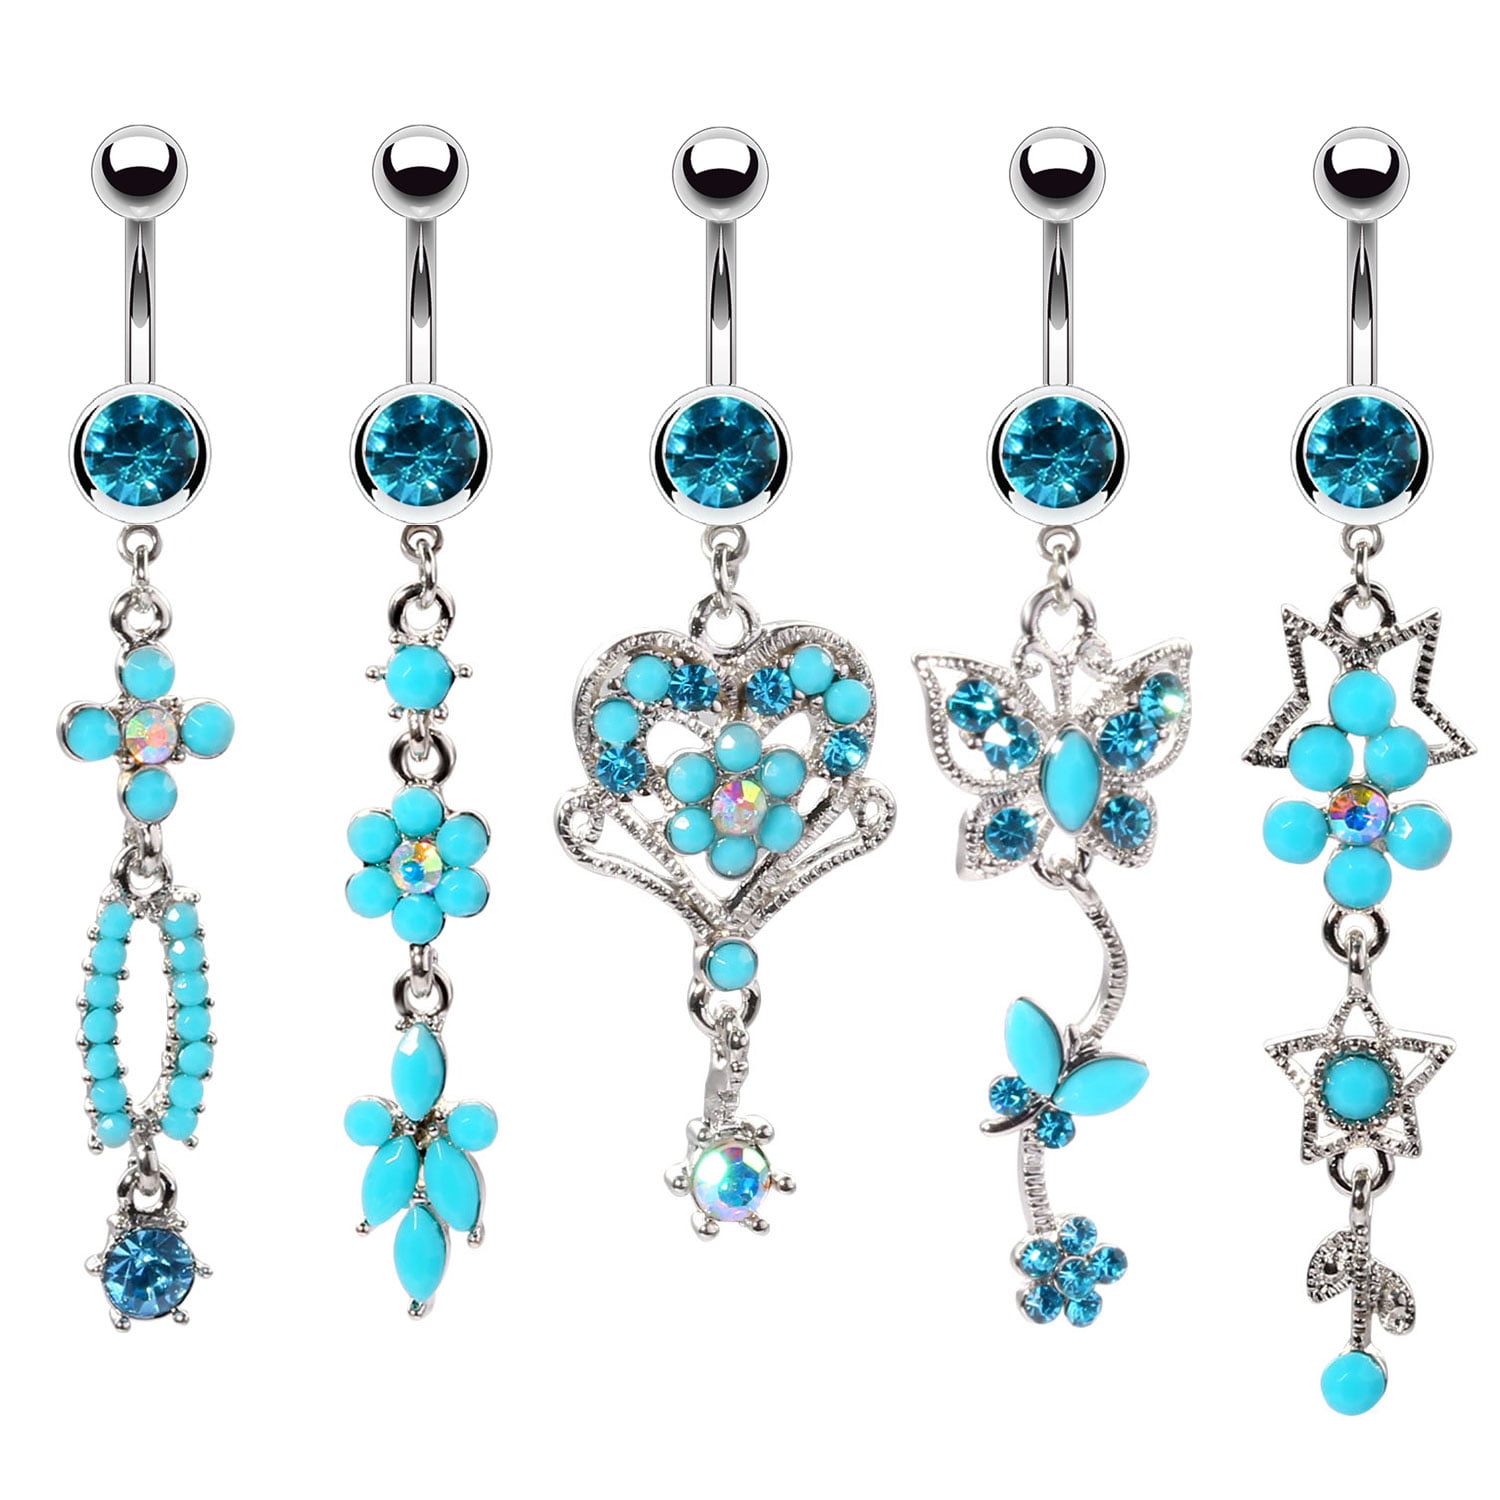 BodyJ4You Belly Button Rings Tribal Dangle Navel 14G Piercing Jewelry 5 Pieces 